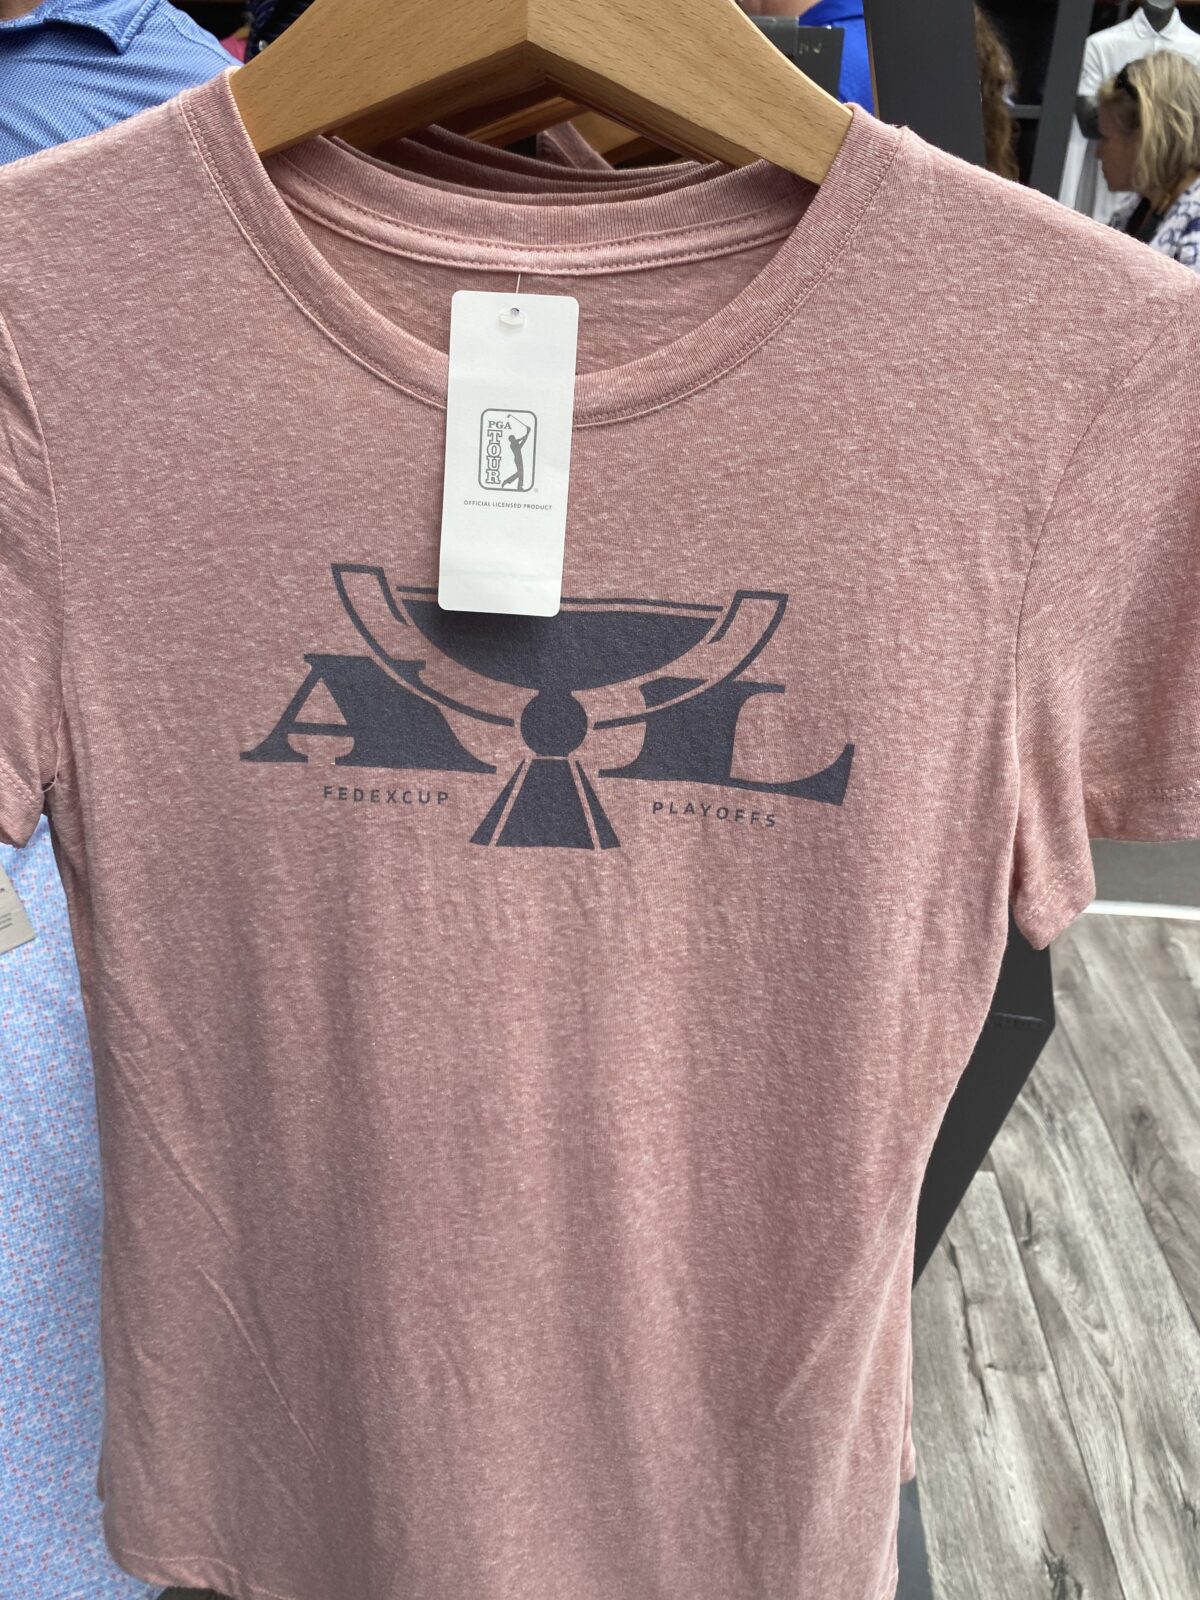 Photos: Merchandise at the 2022 Tour Championship at East Lake Golf Club